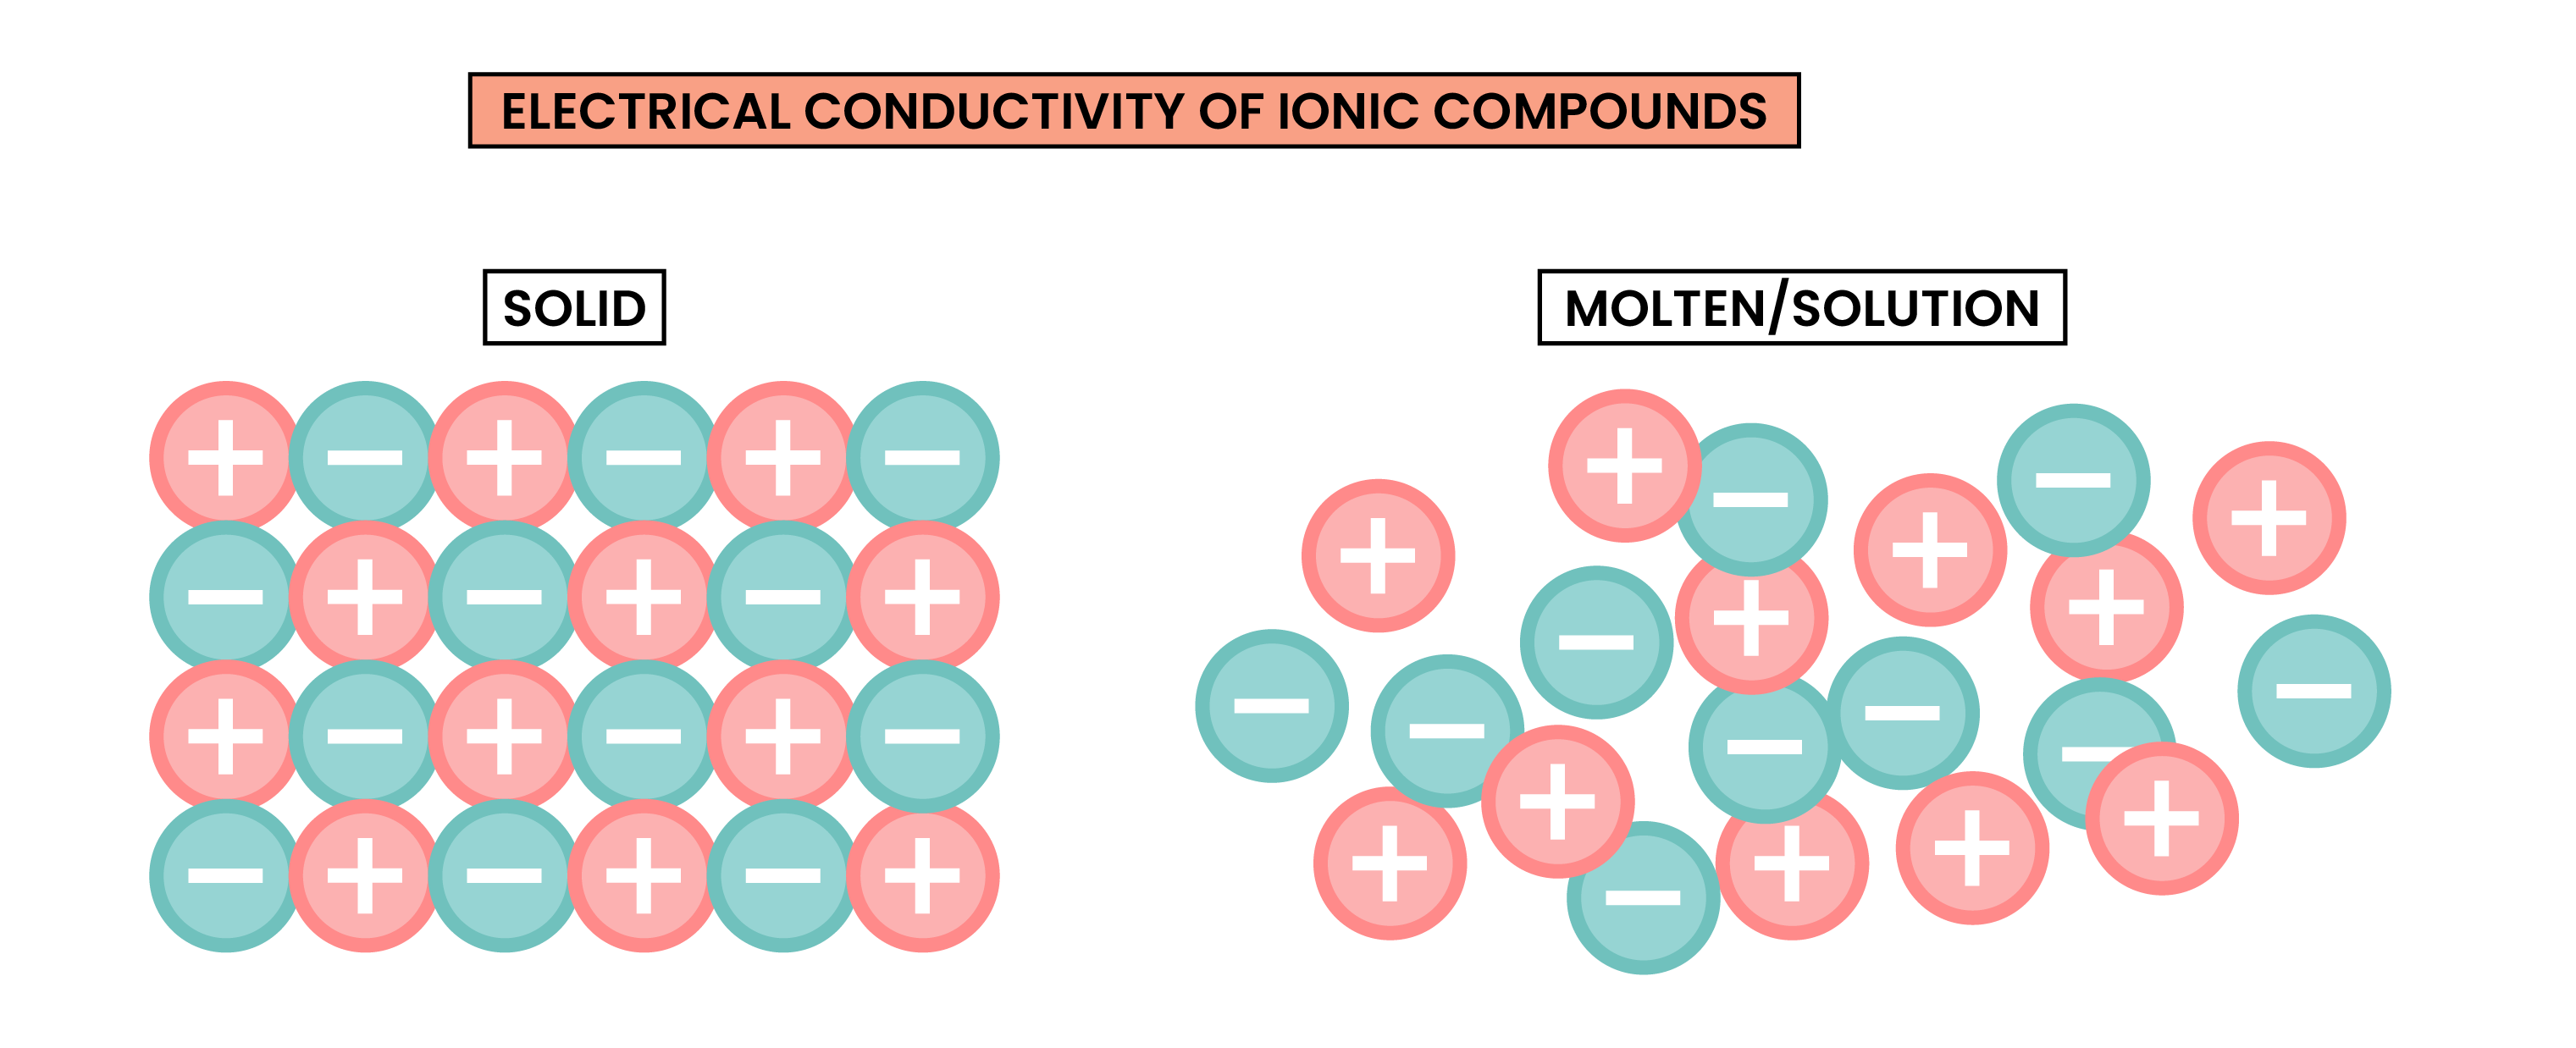 edexcel_igcse_chemistry_topic 06_ionic bonding_008_electrical conductivity of ionic compounds molten and solid diagram